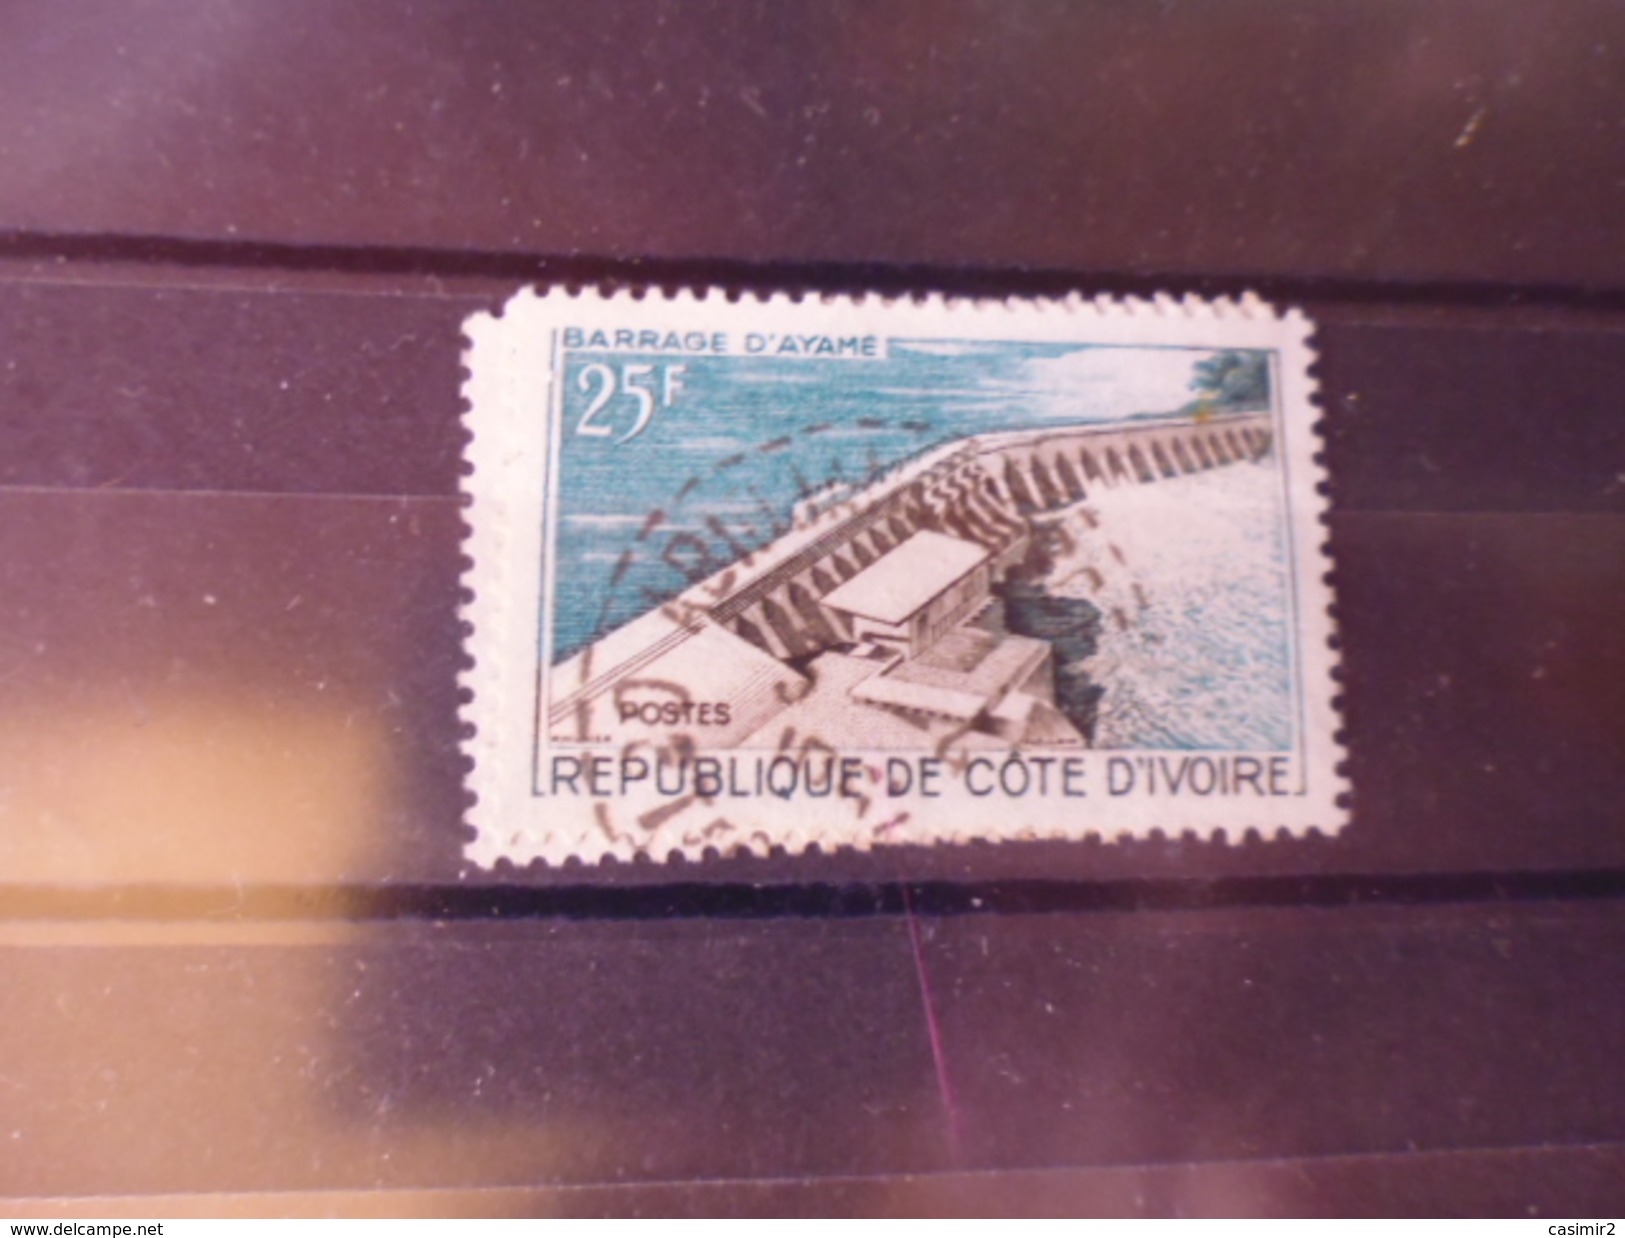 COTE D IVOIRE TIMBRE  REFERENCE YVERT N° 200 - Ivory Coast (1960-...)